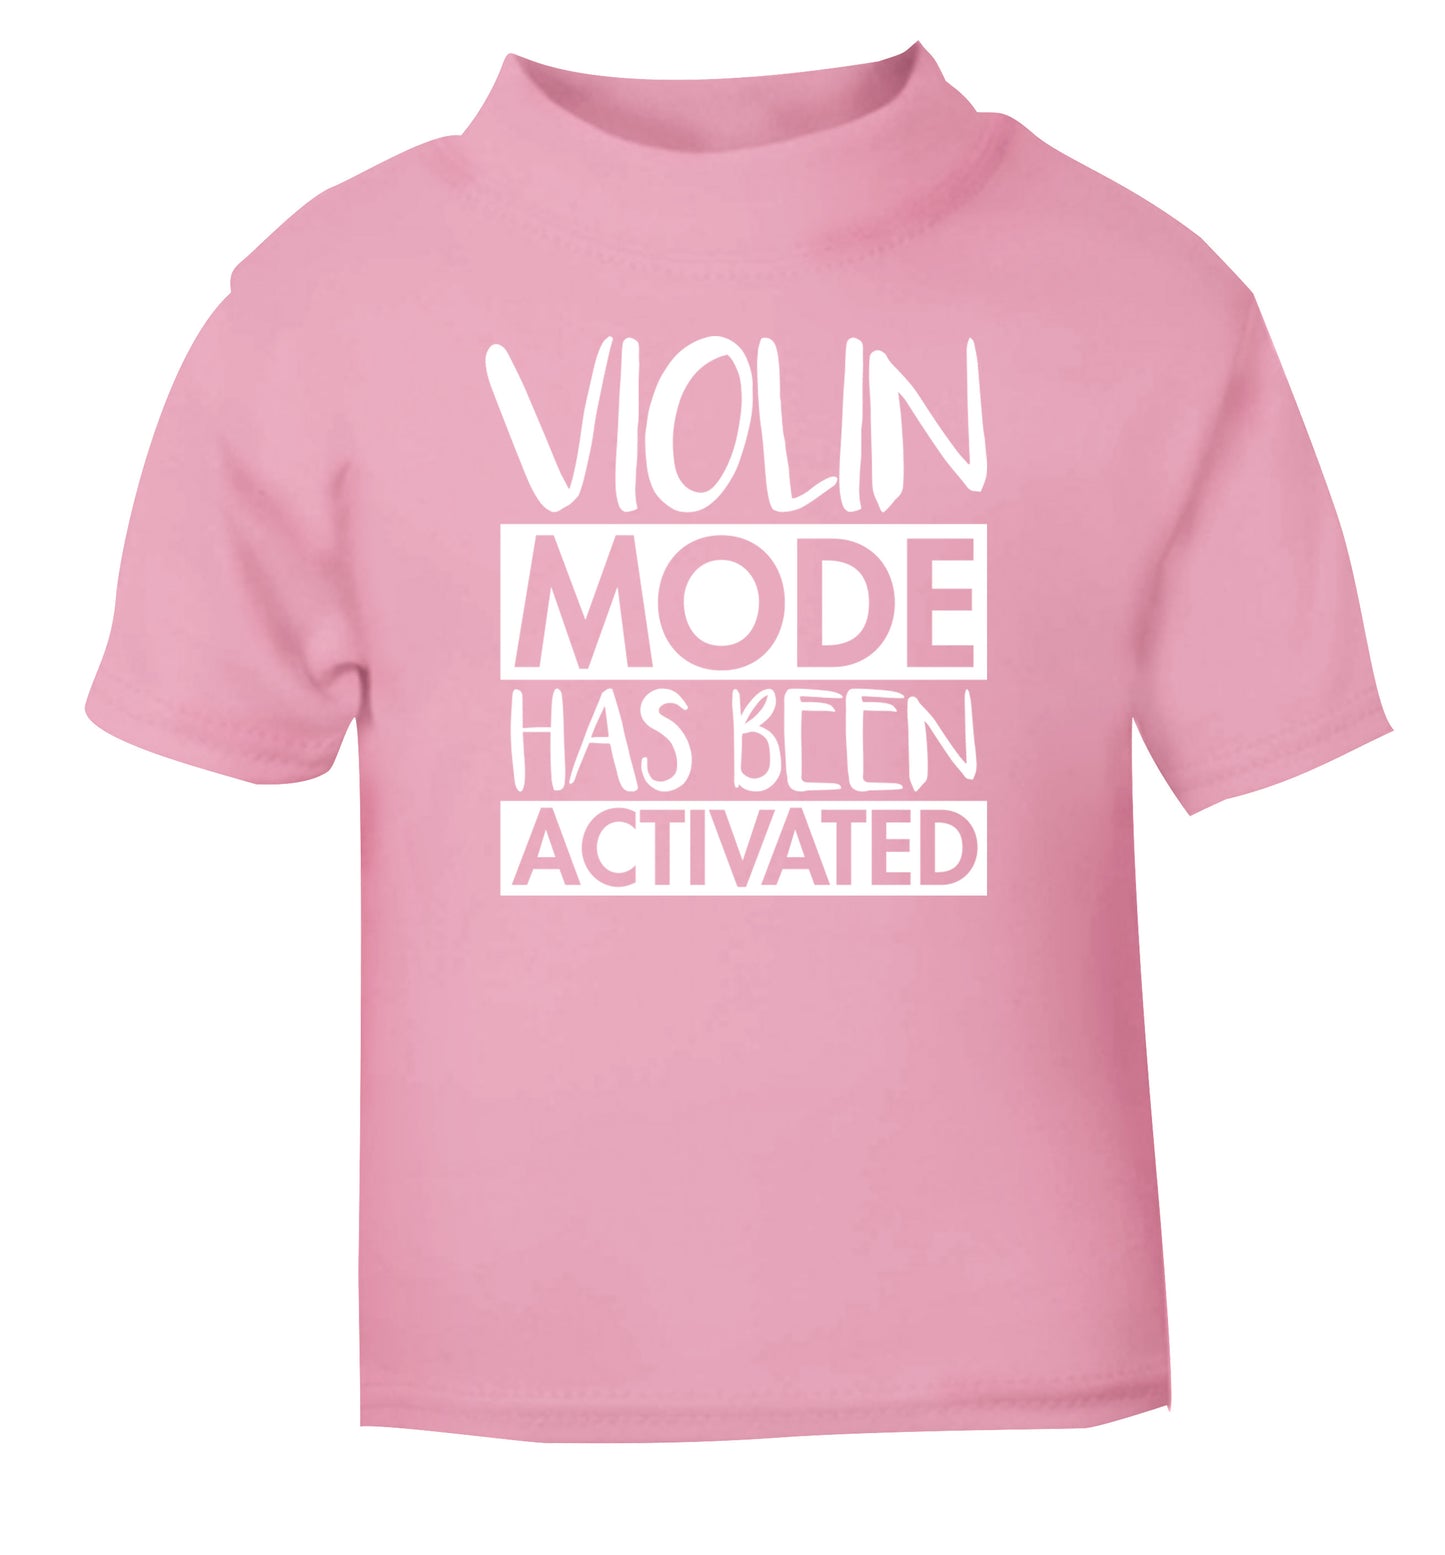 Violin Mode Activated light pink Baby Toddler Tshirt 2 Years